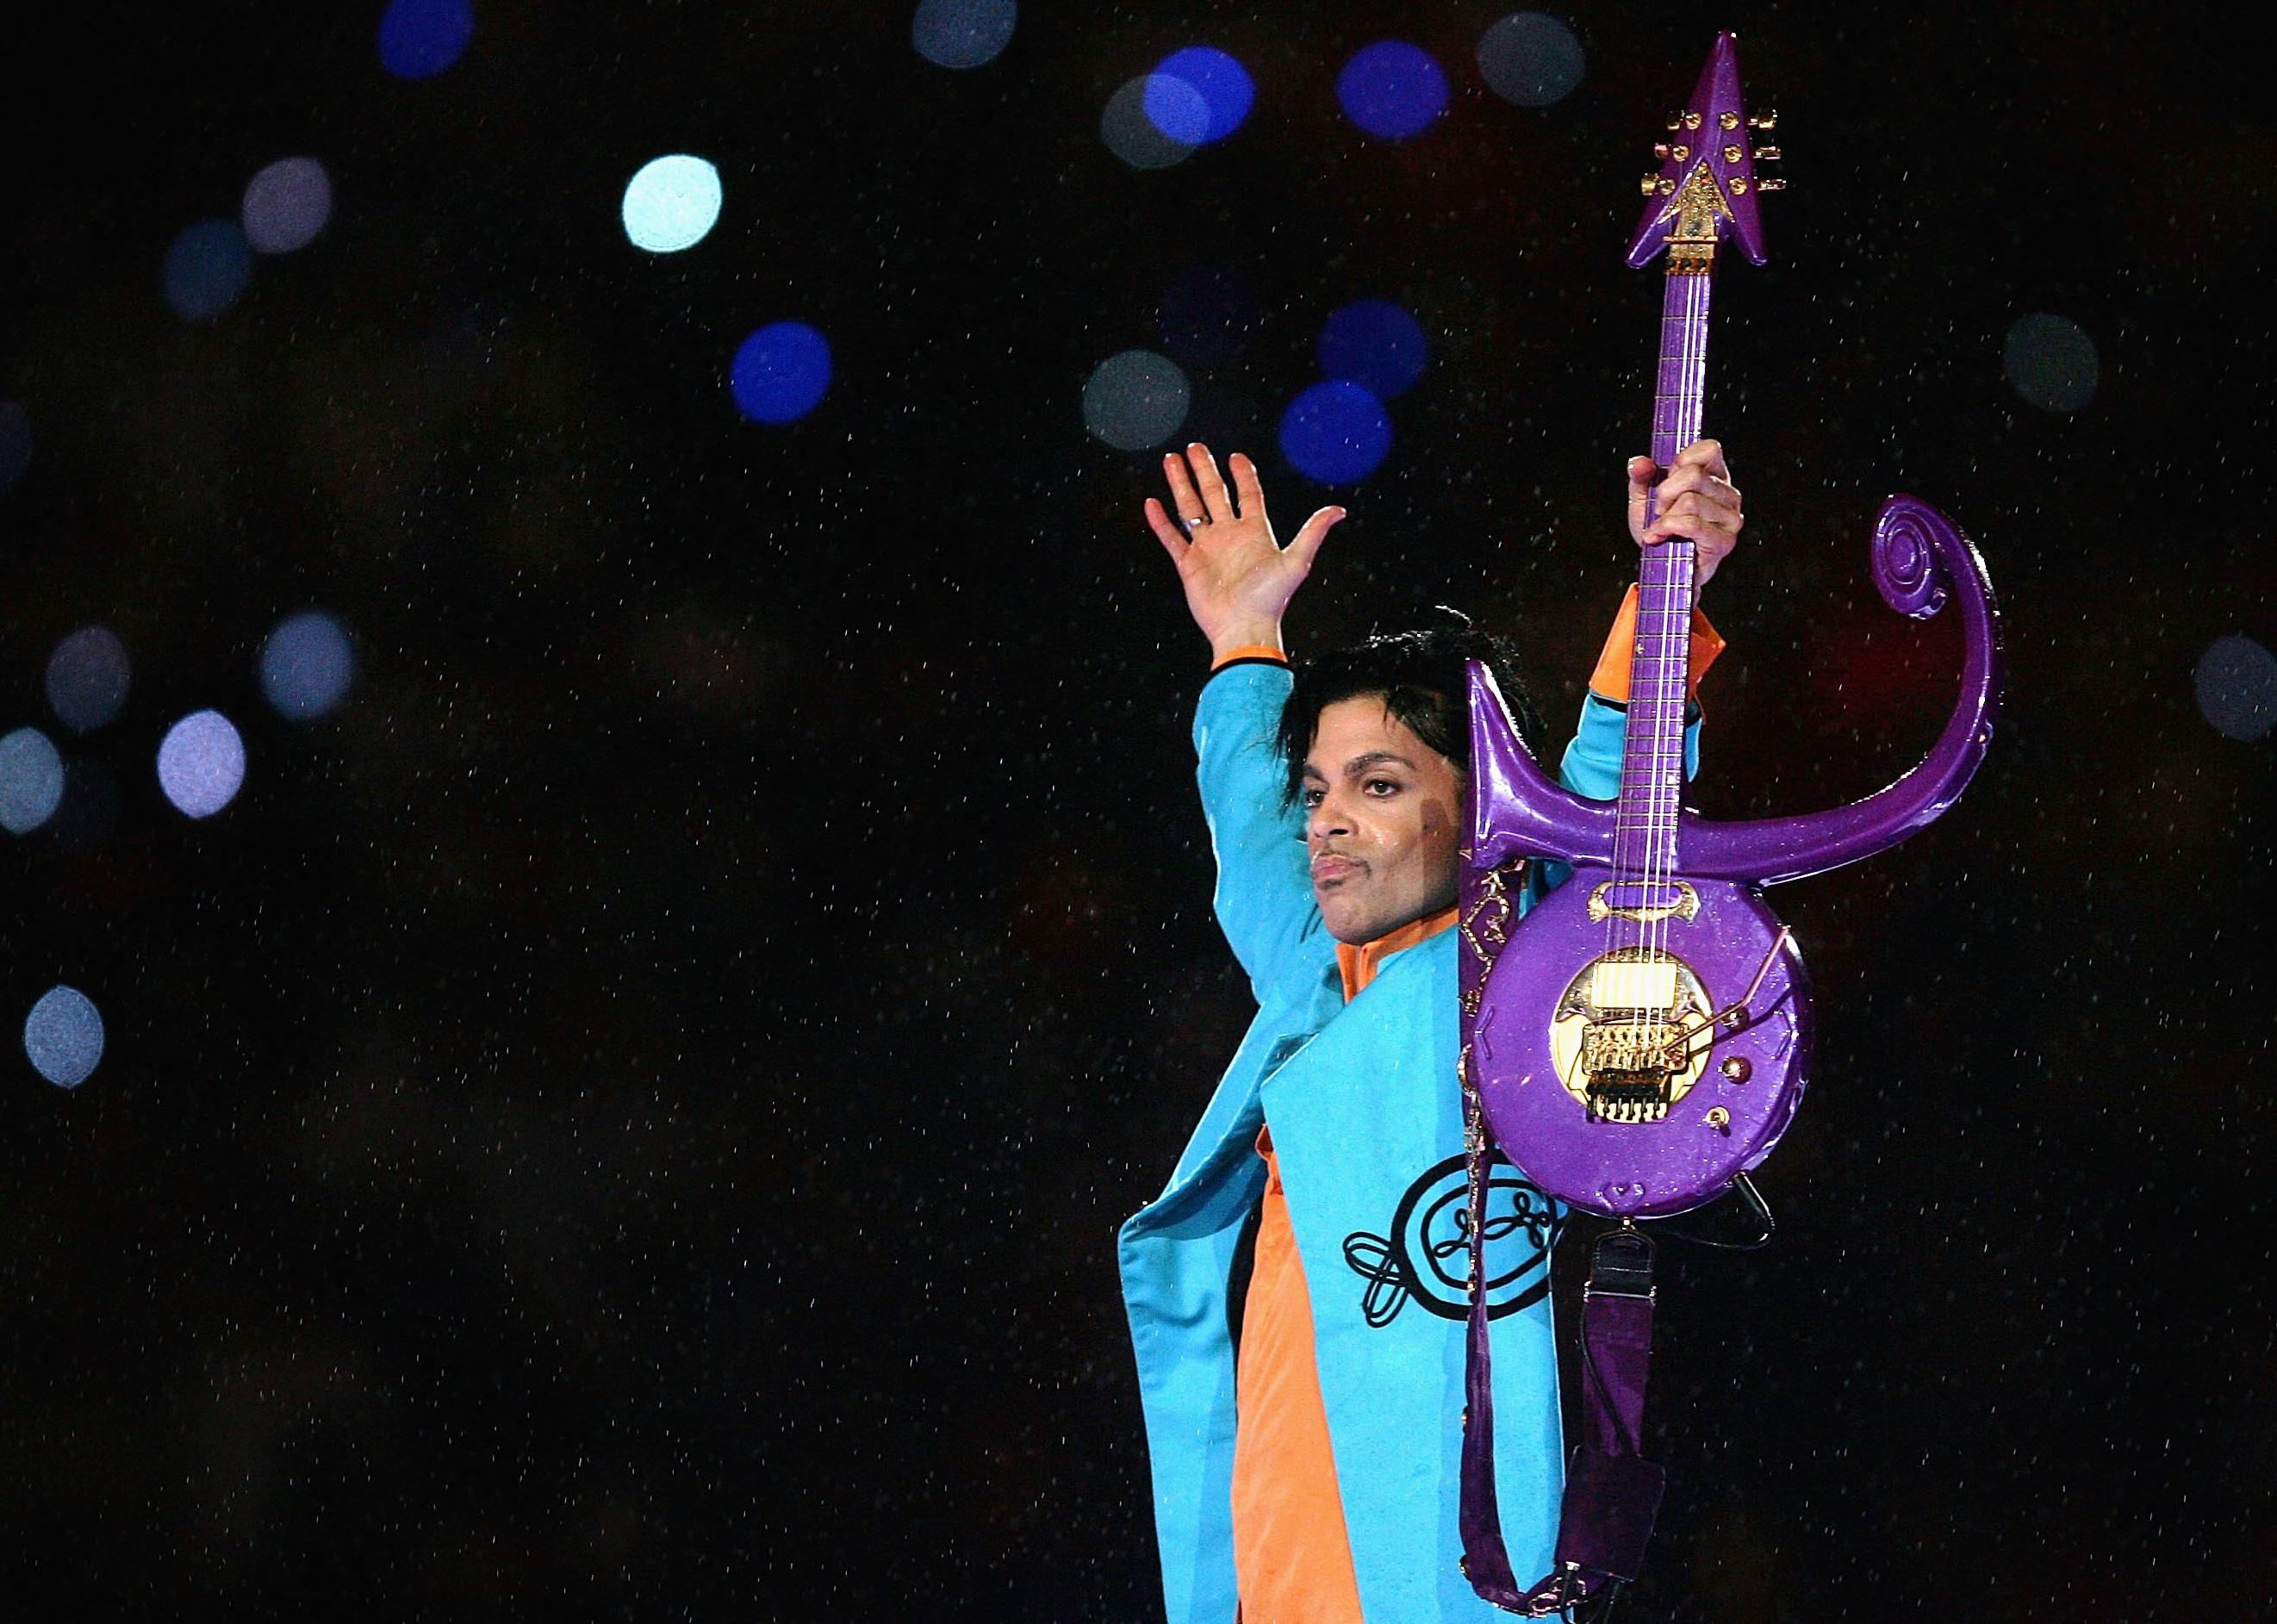 Prince performs during the Super Bowl XLI halftime show sponsored by Pepsi.